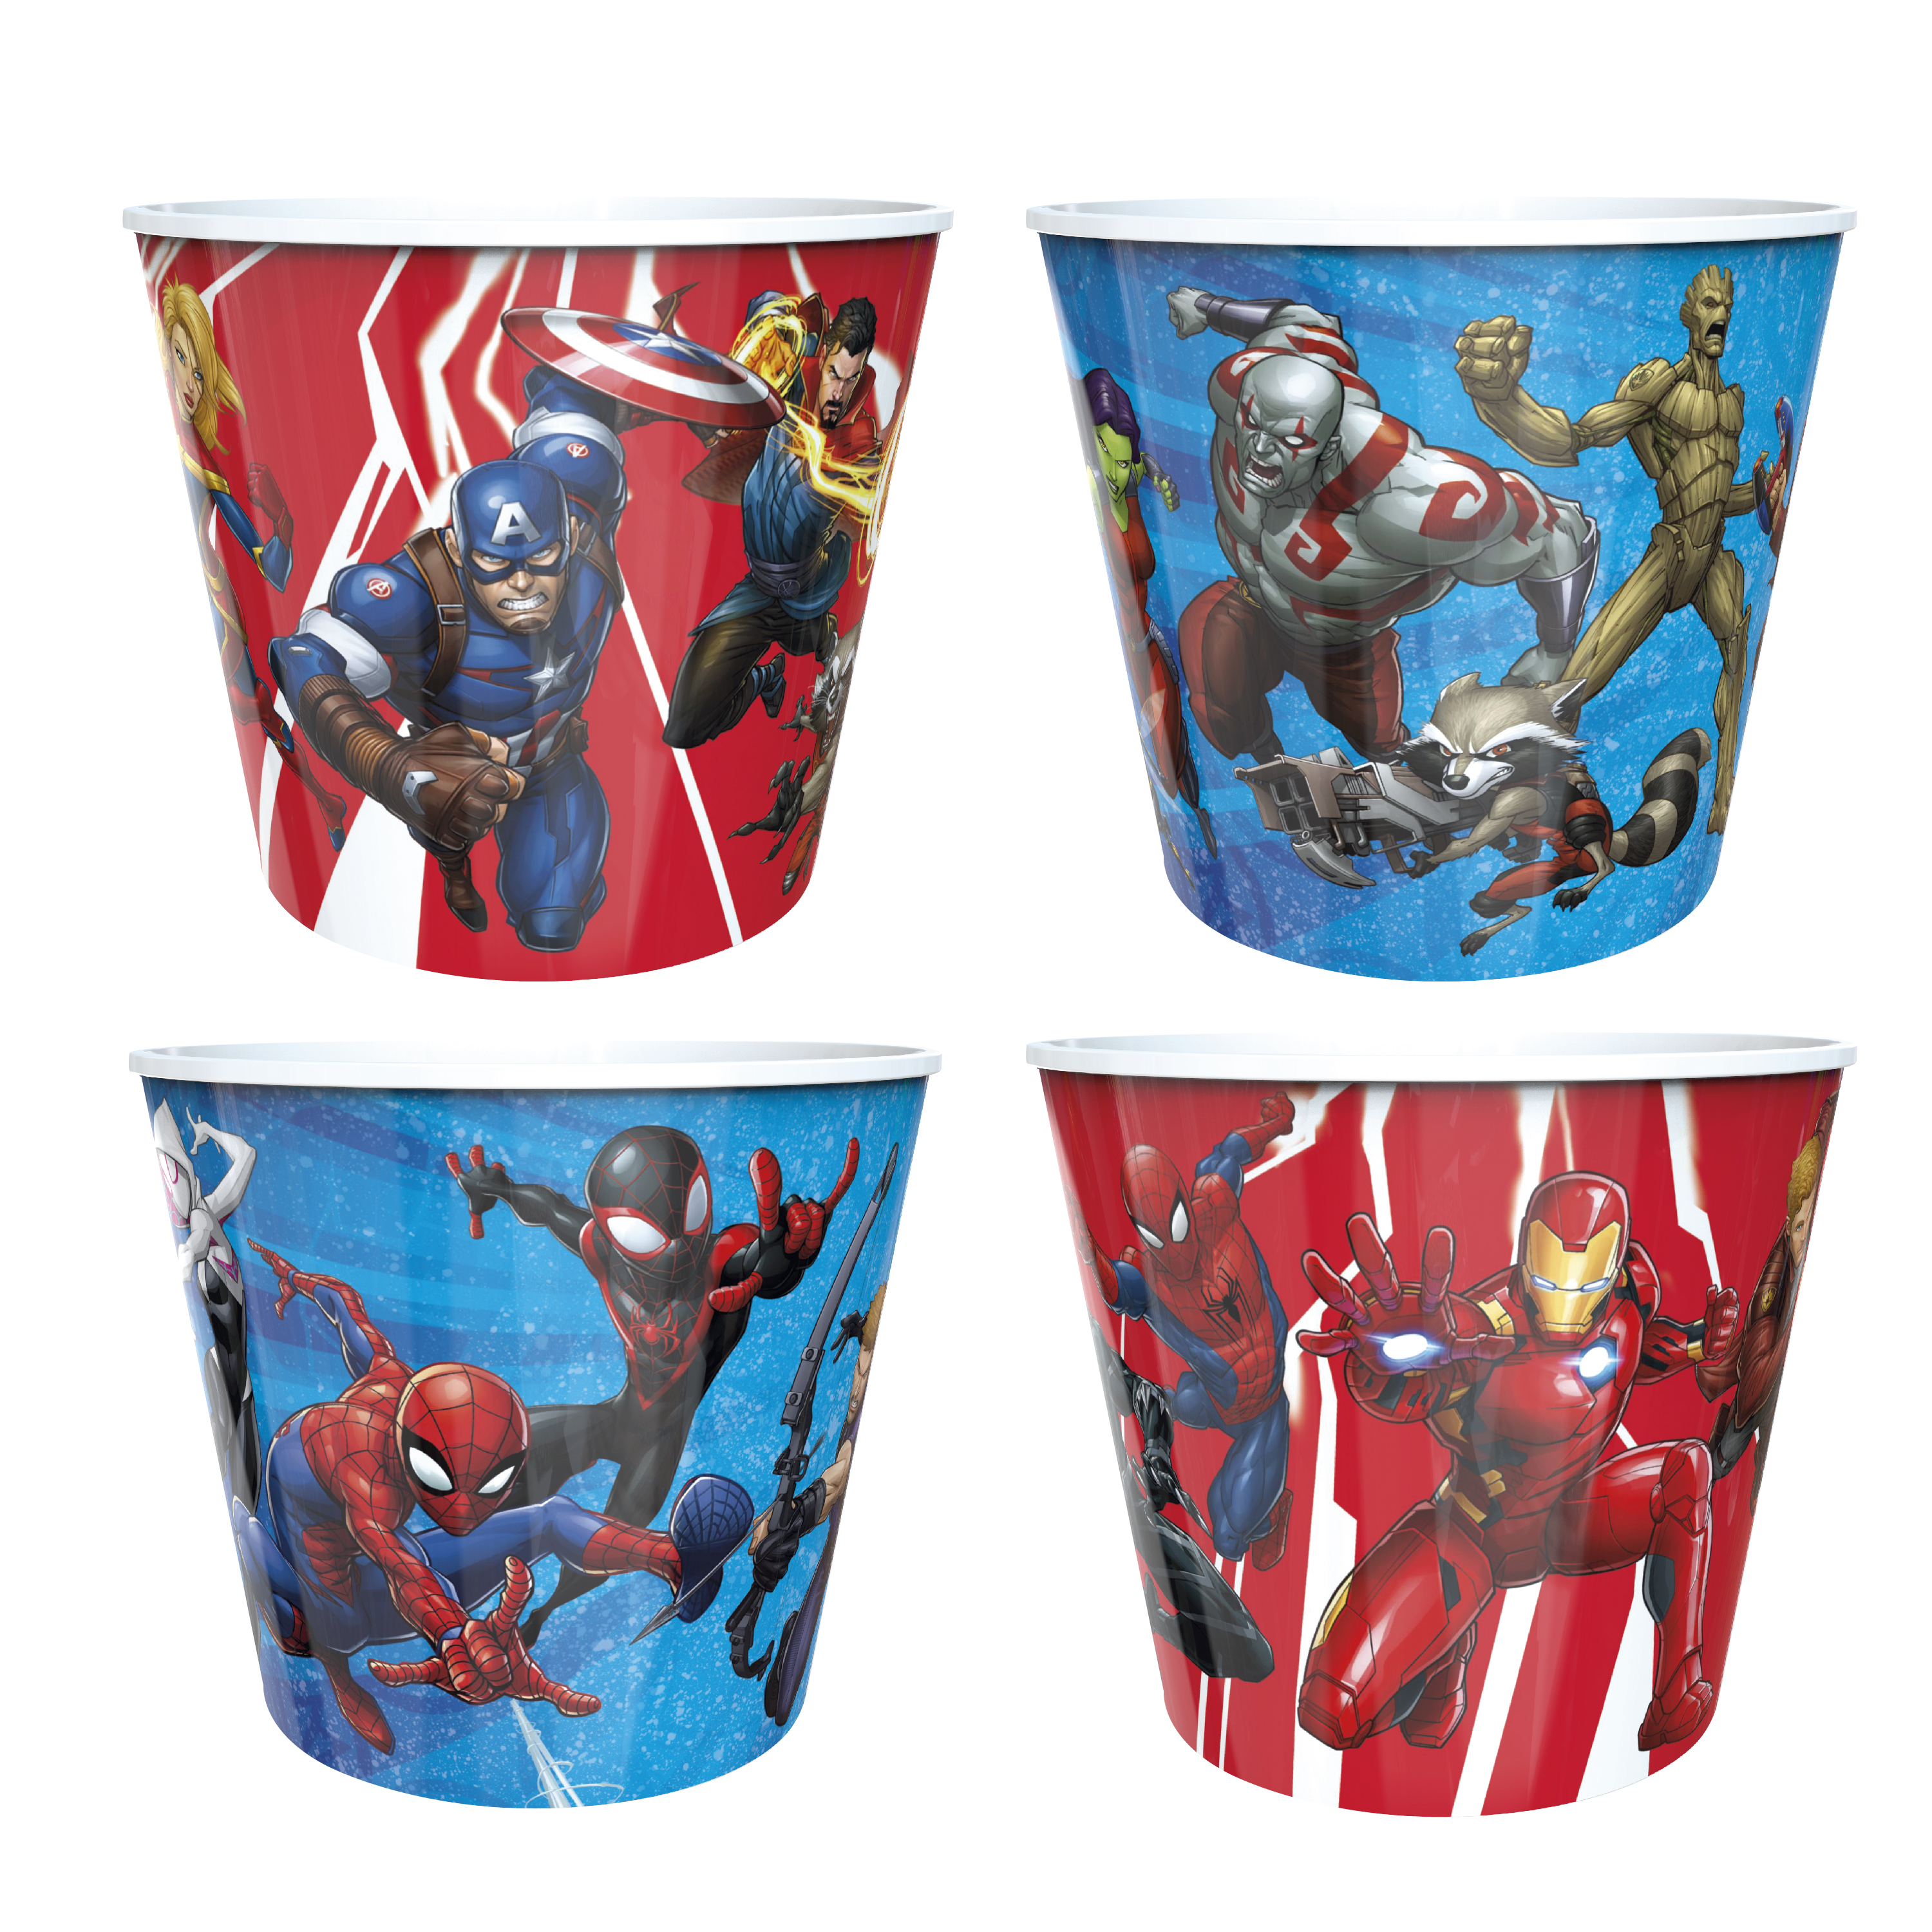 Marvel Comics Plastic Popcorn Container and Bowls, The Hulk, Spider-Man and More, 5-piece set slideshow image 7